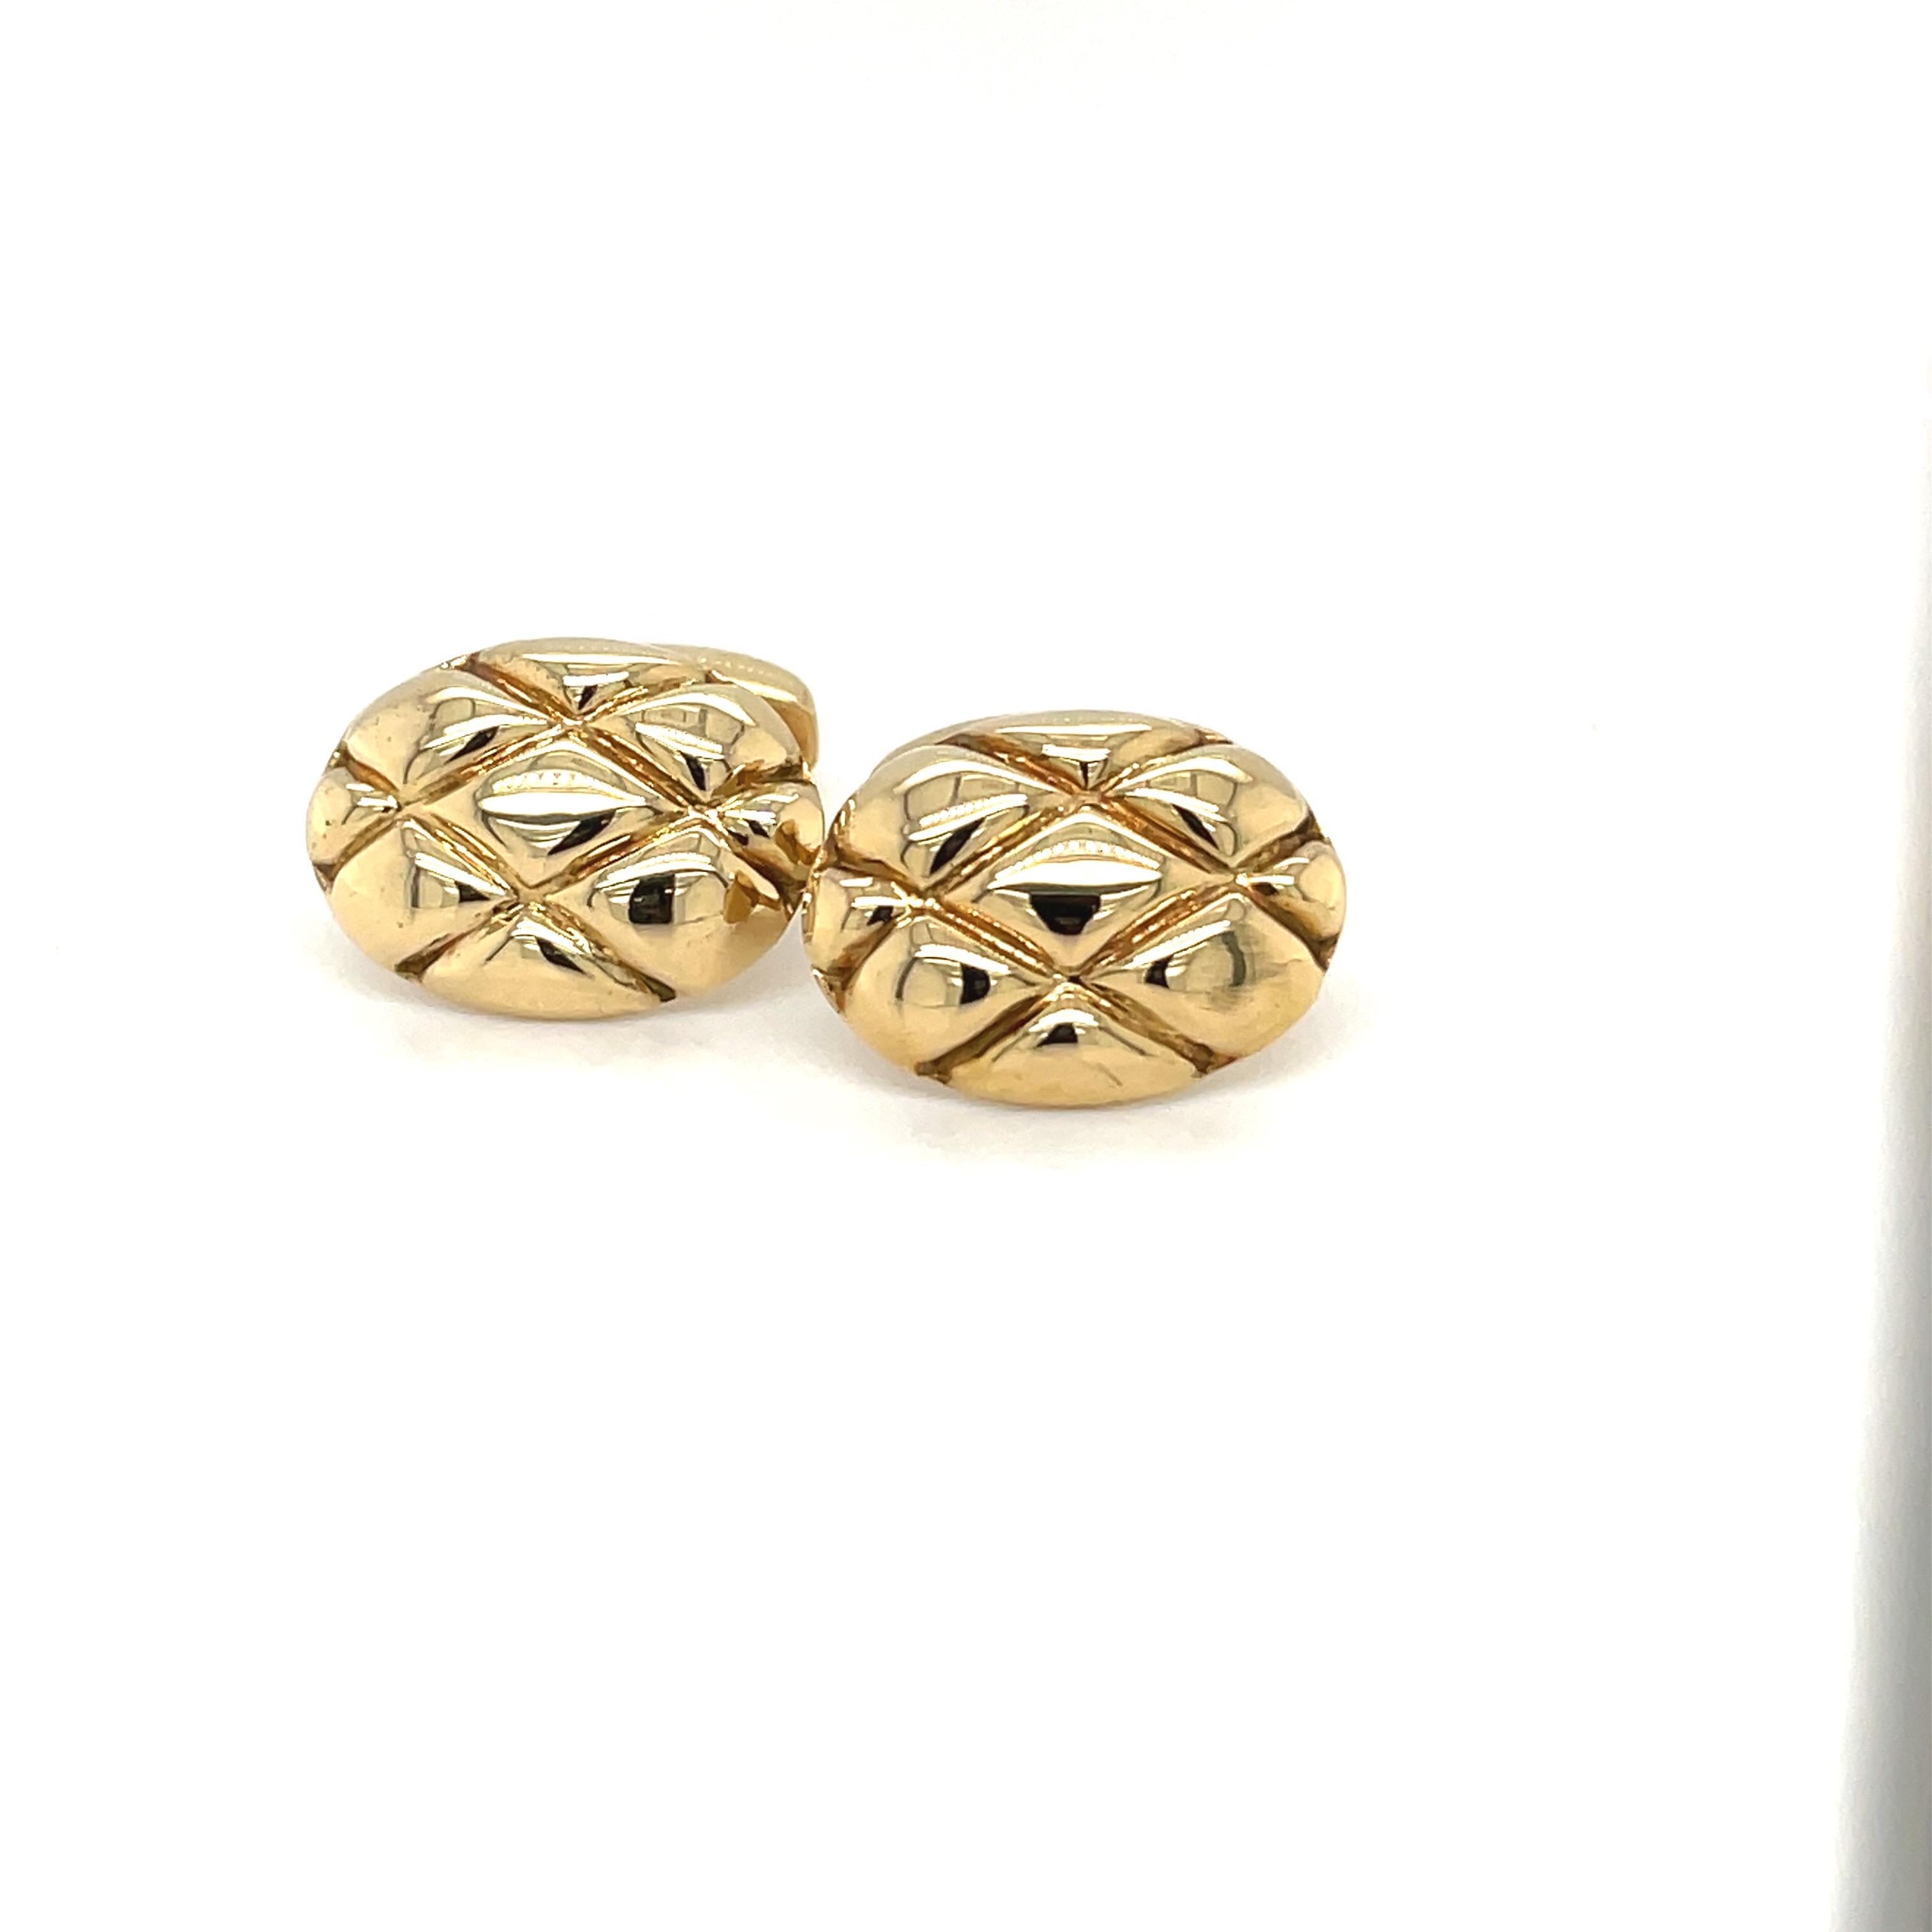 18 karat yellow gold oval cuff links by Deakin & Francis, England's oldest family jewelers since 1786.
The oval cuff links are a high polished yellow gold with a quilted lattice design. The bar back style cuff links are 18 x 13.5 mm.
Stamped 